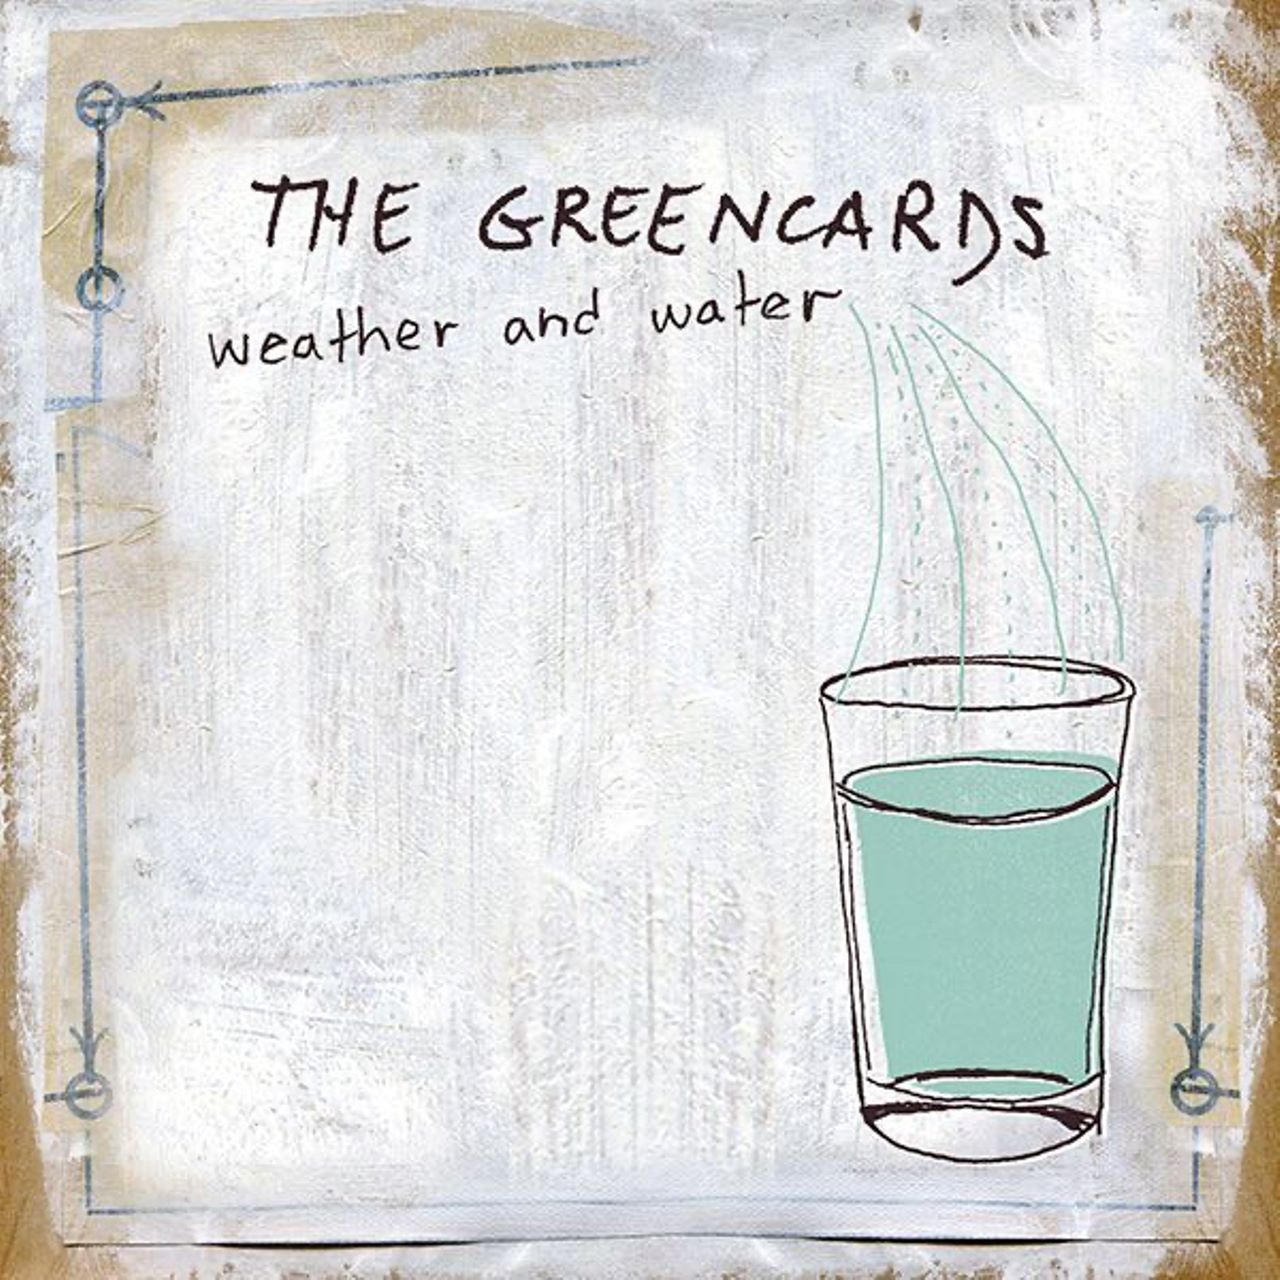 Greencards - Weather And Water cover album